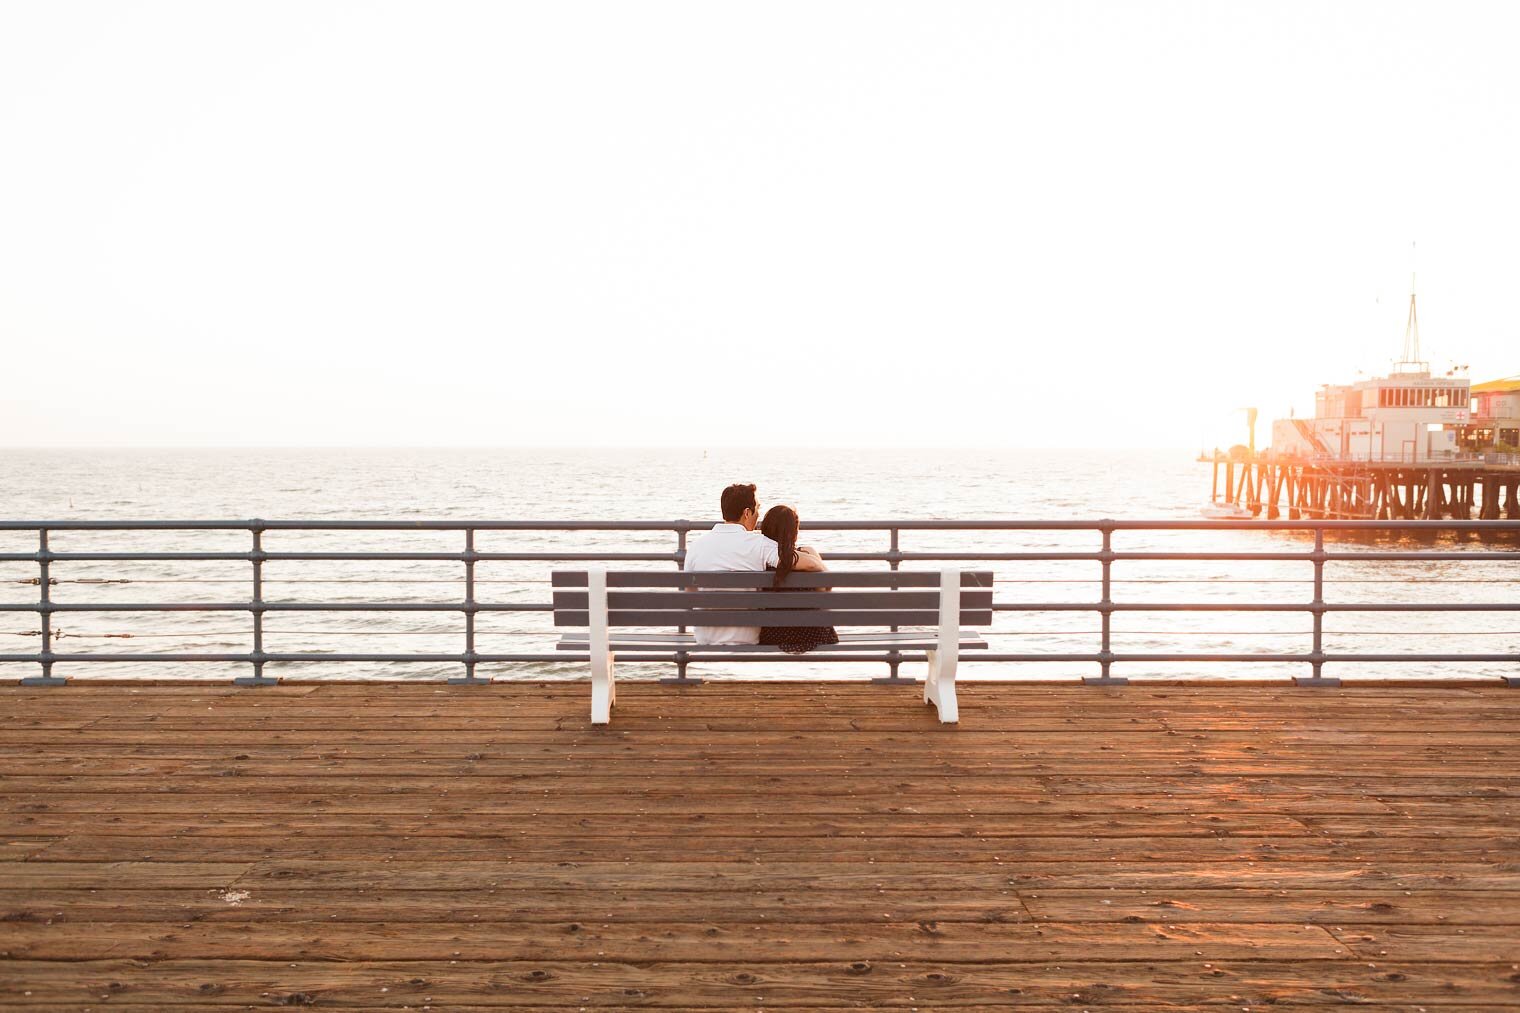 Destination engagement photographs in Santa Monica and Hollywood, California.